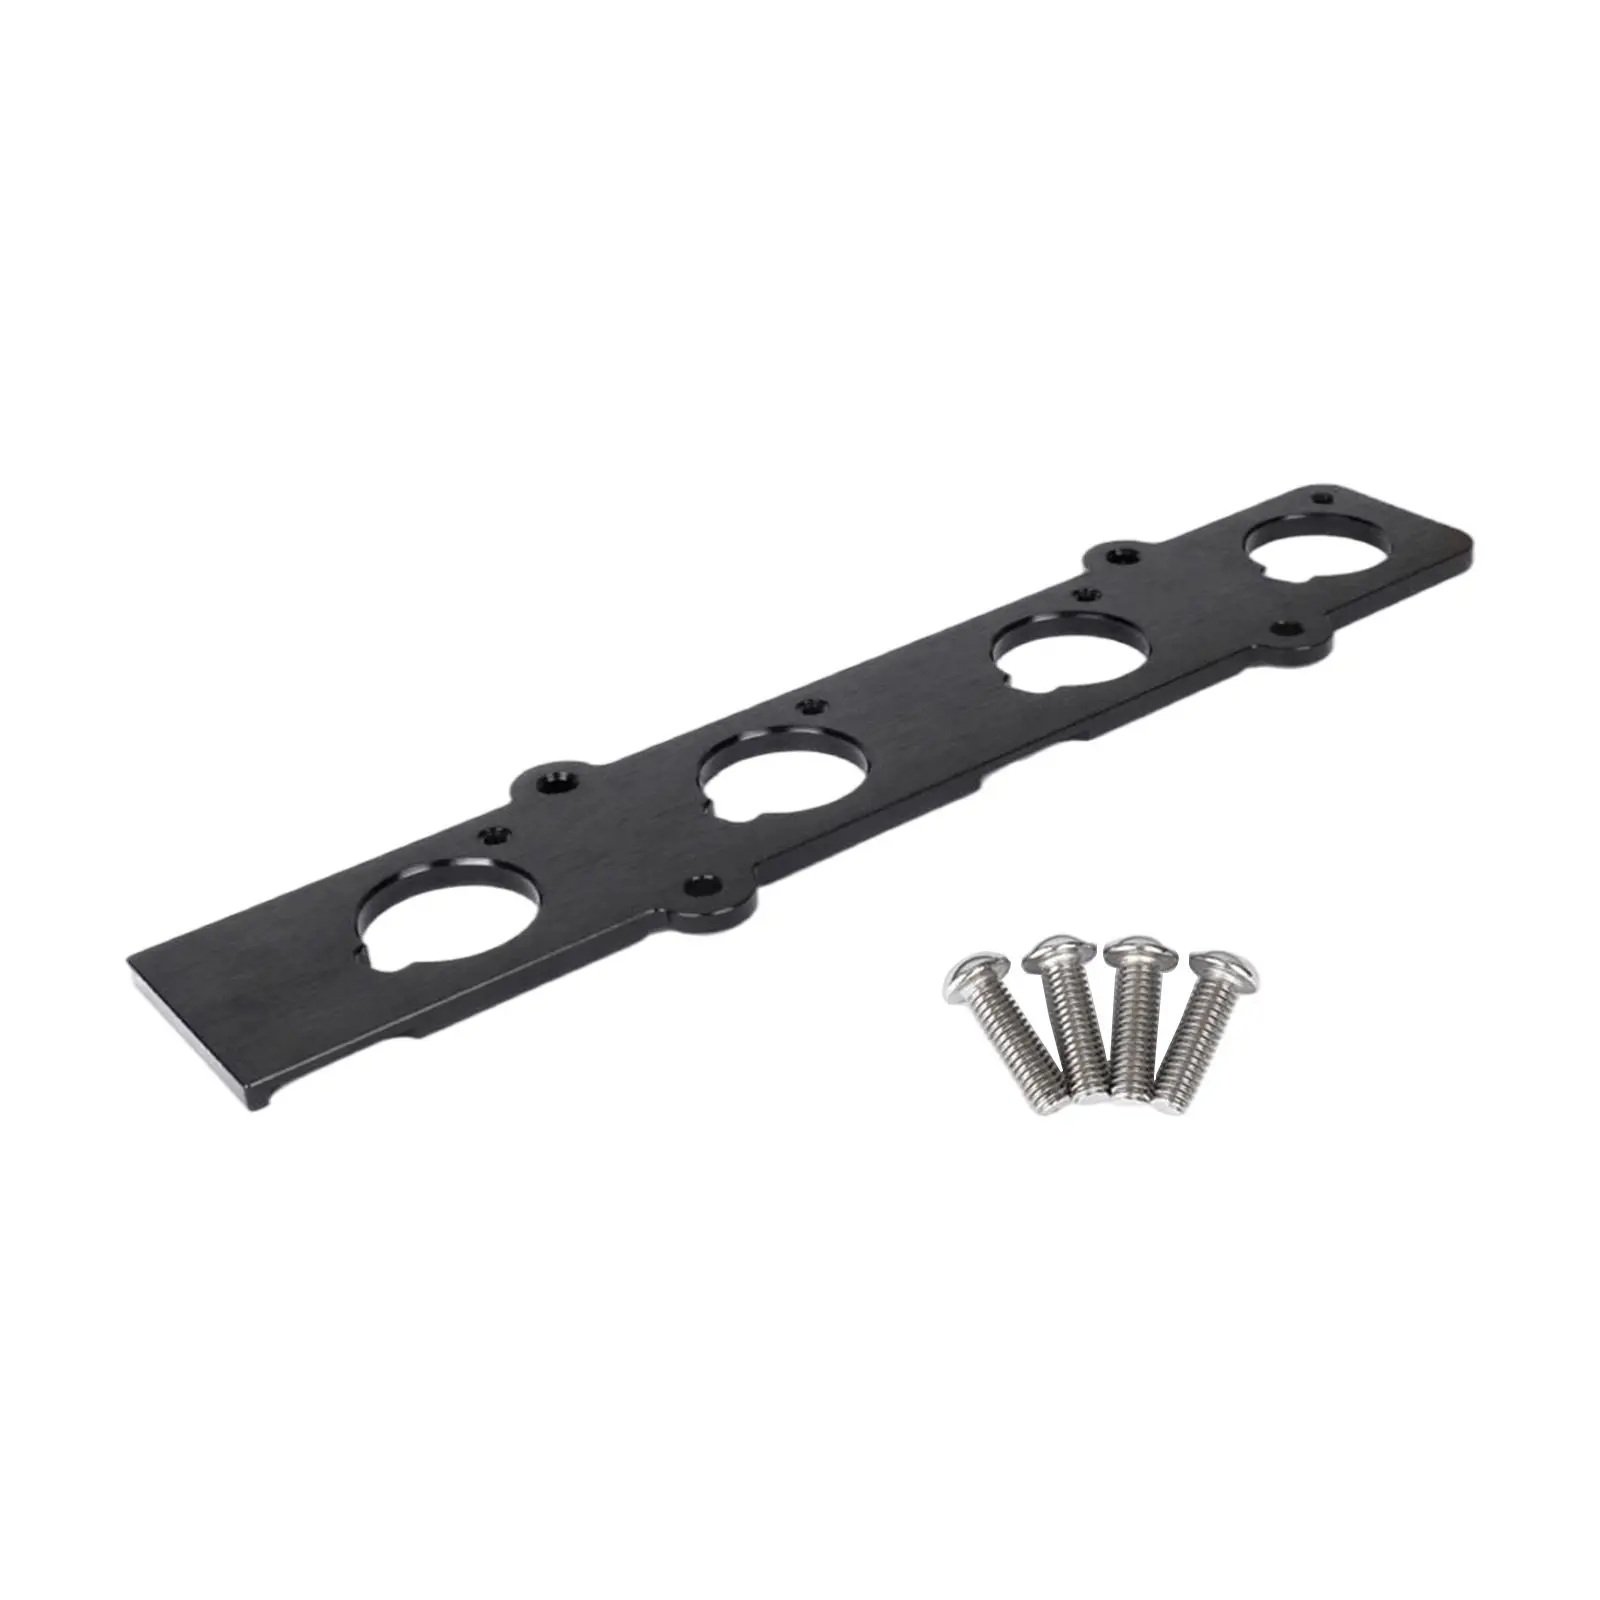 B-Series Dohc Vtec Coil Adapter Plate Conversion Adapters for Acura B16 B18